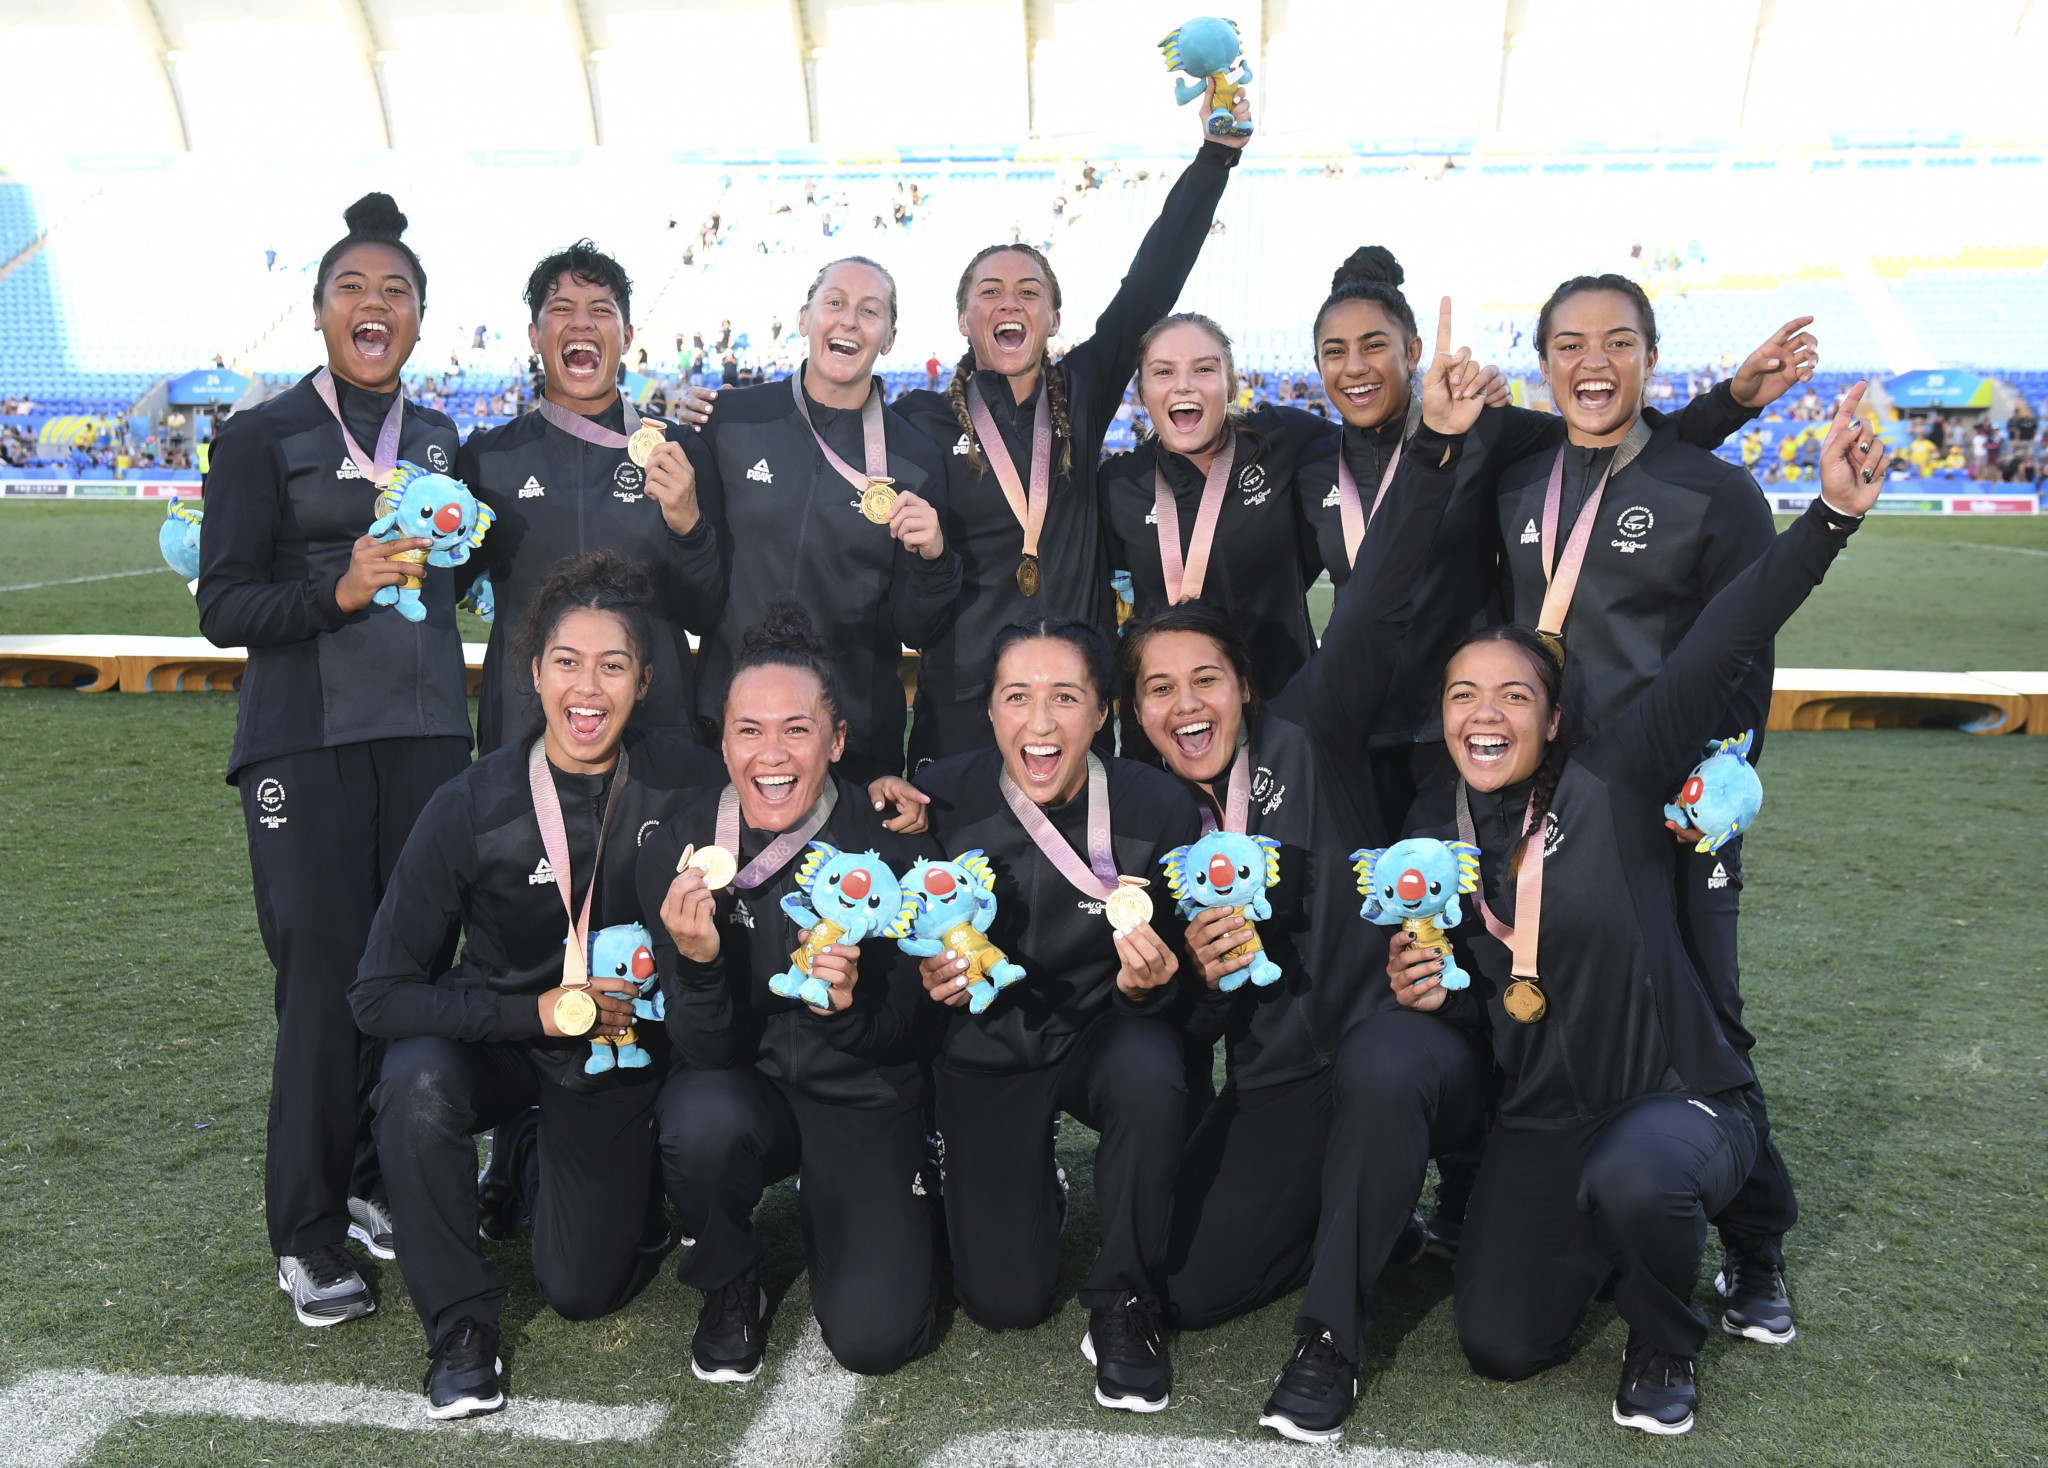 New Zealand were awarded the Lonsdale Cup after a successful year which included gold in the Gold Coast Commonwealth Games ©Getty Images